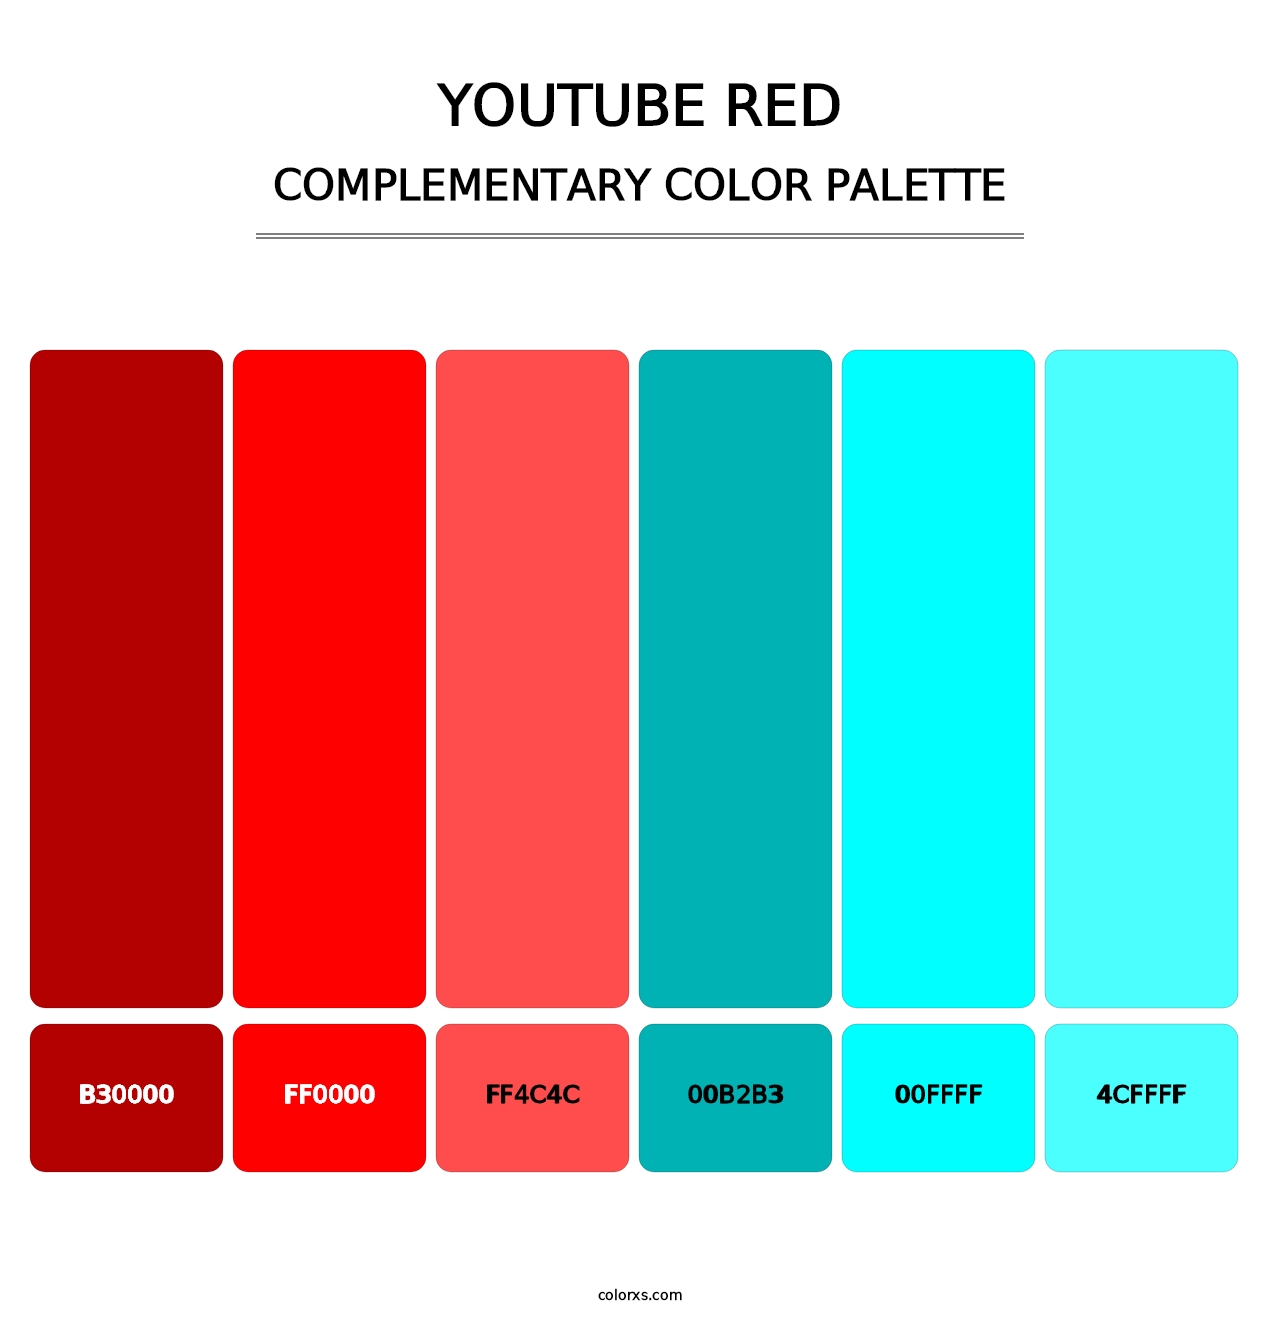 YouTube Red - Complementary Color Palette